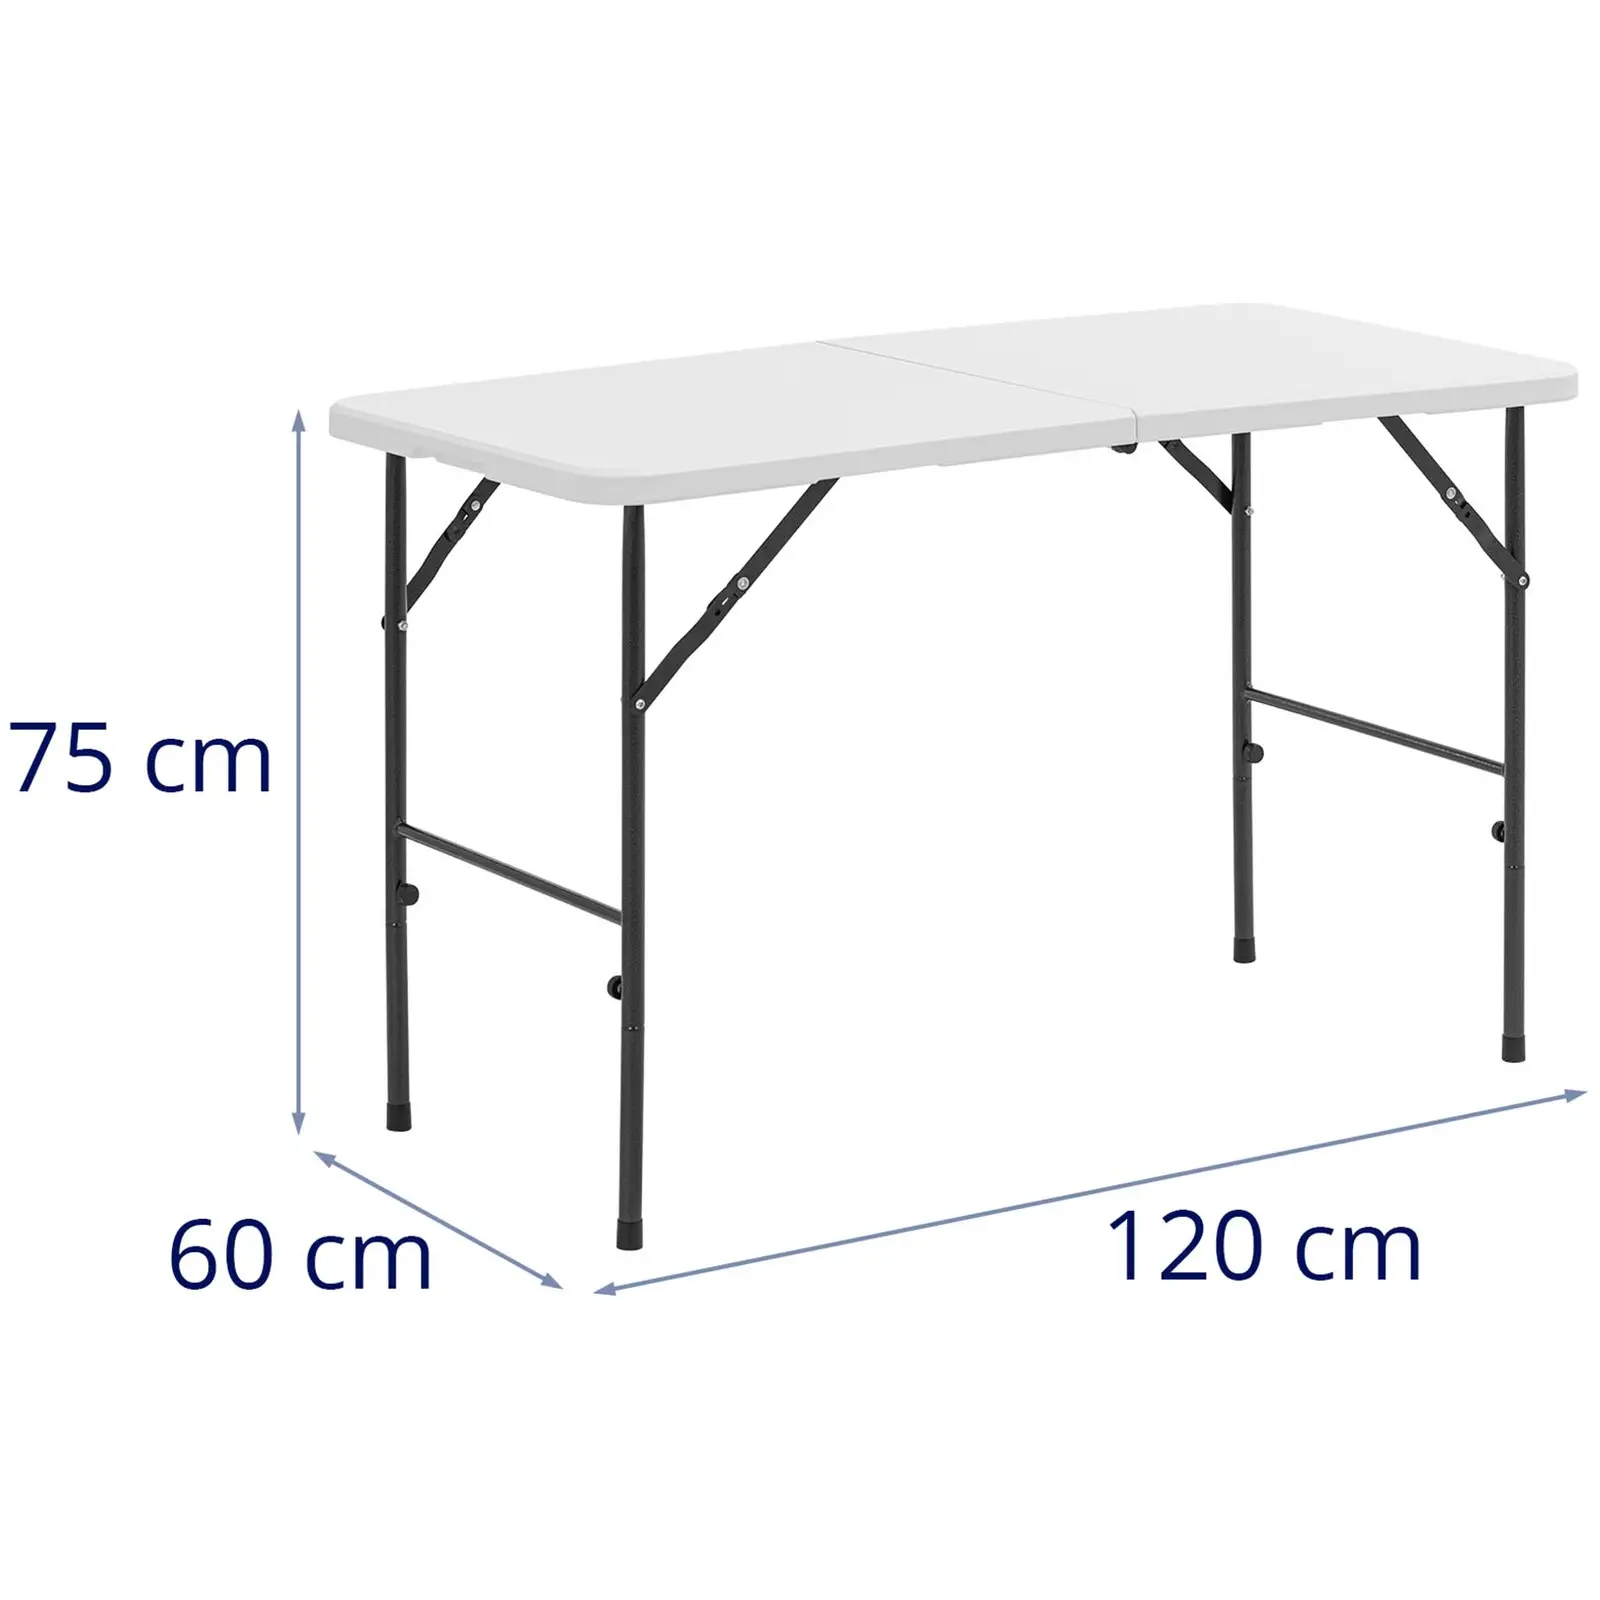 Folding Table - 120 x 60 x 74.50 cm -75 kg - indoor/outdoor - white